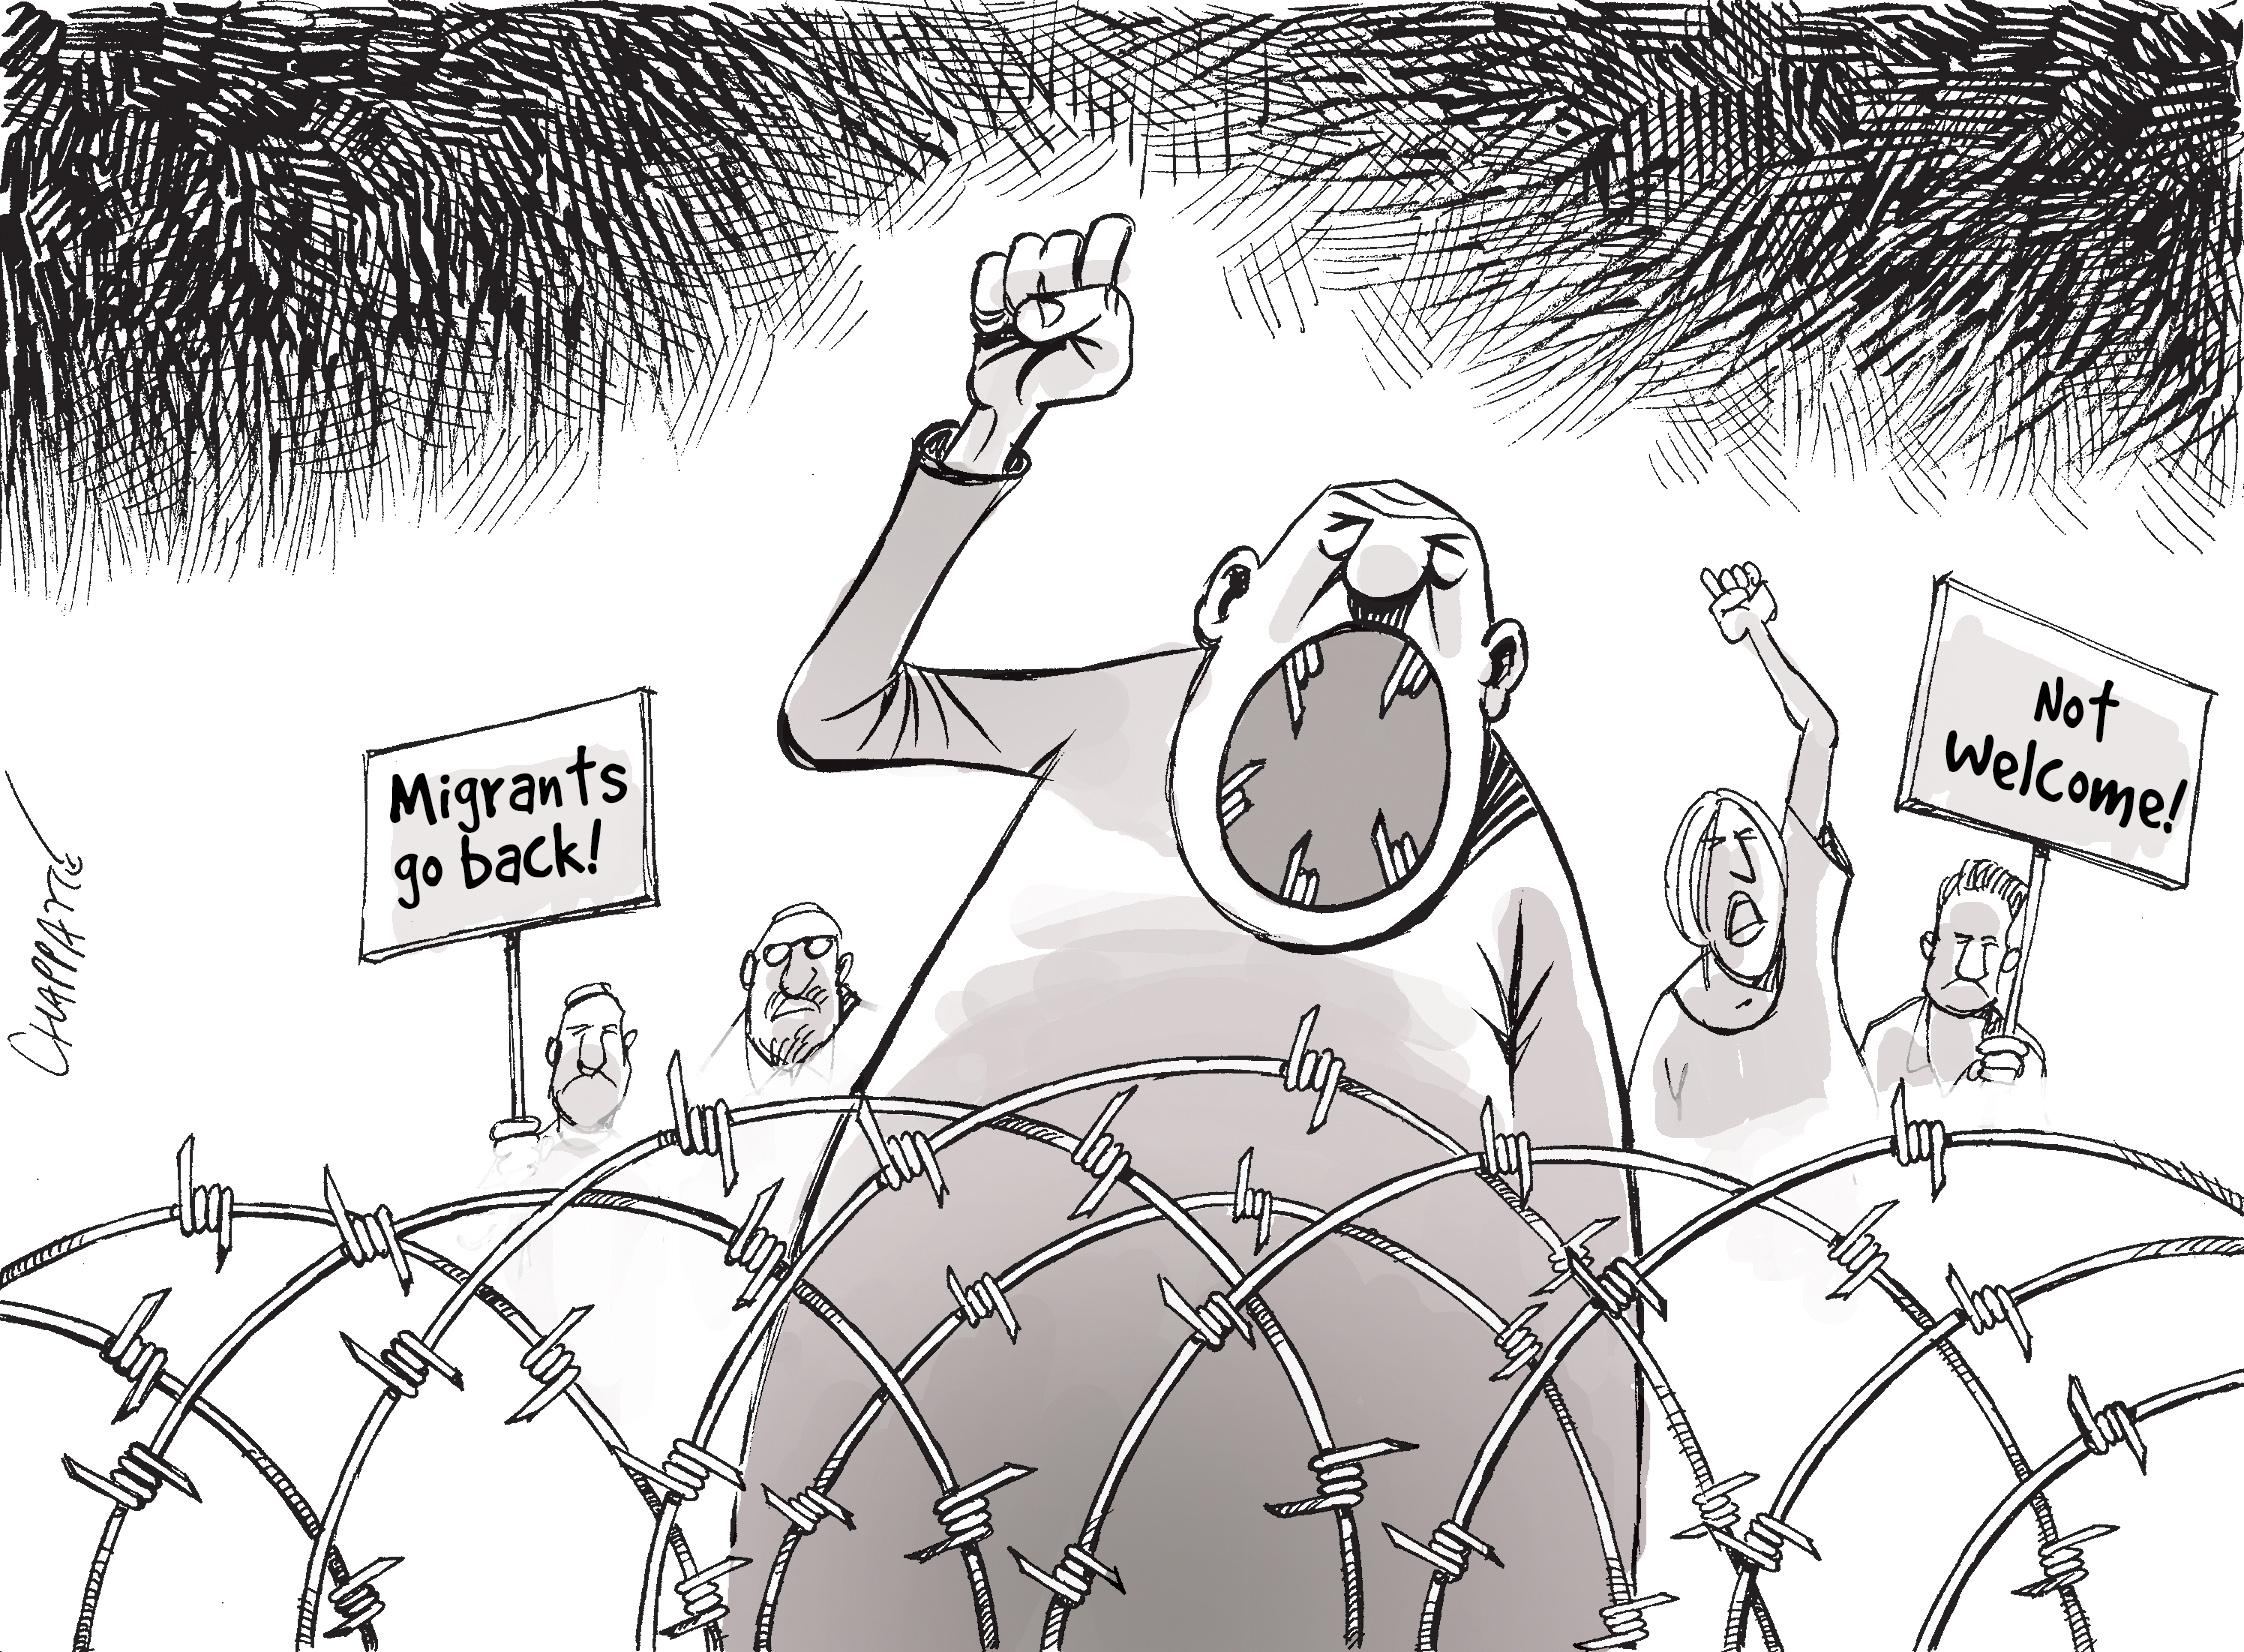 Not Welcome In Hungary!